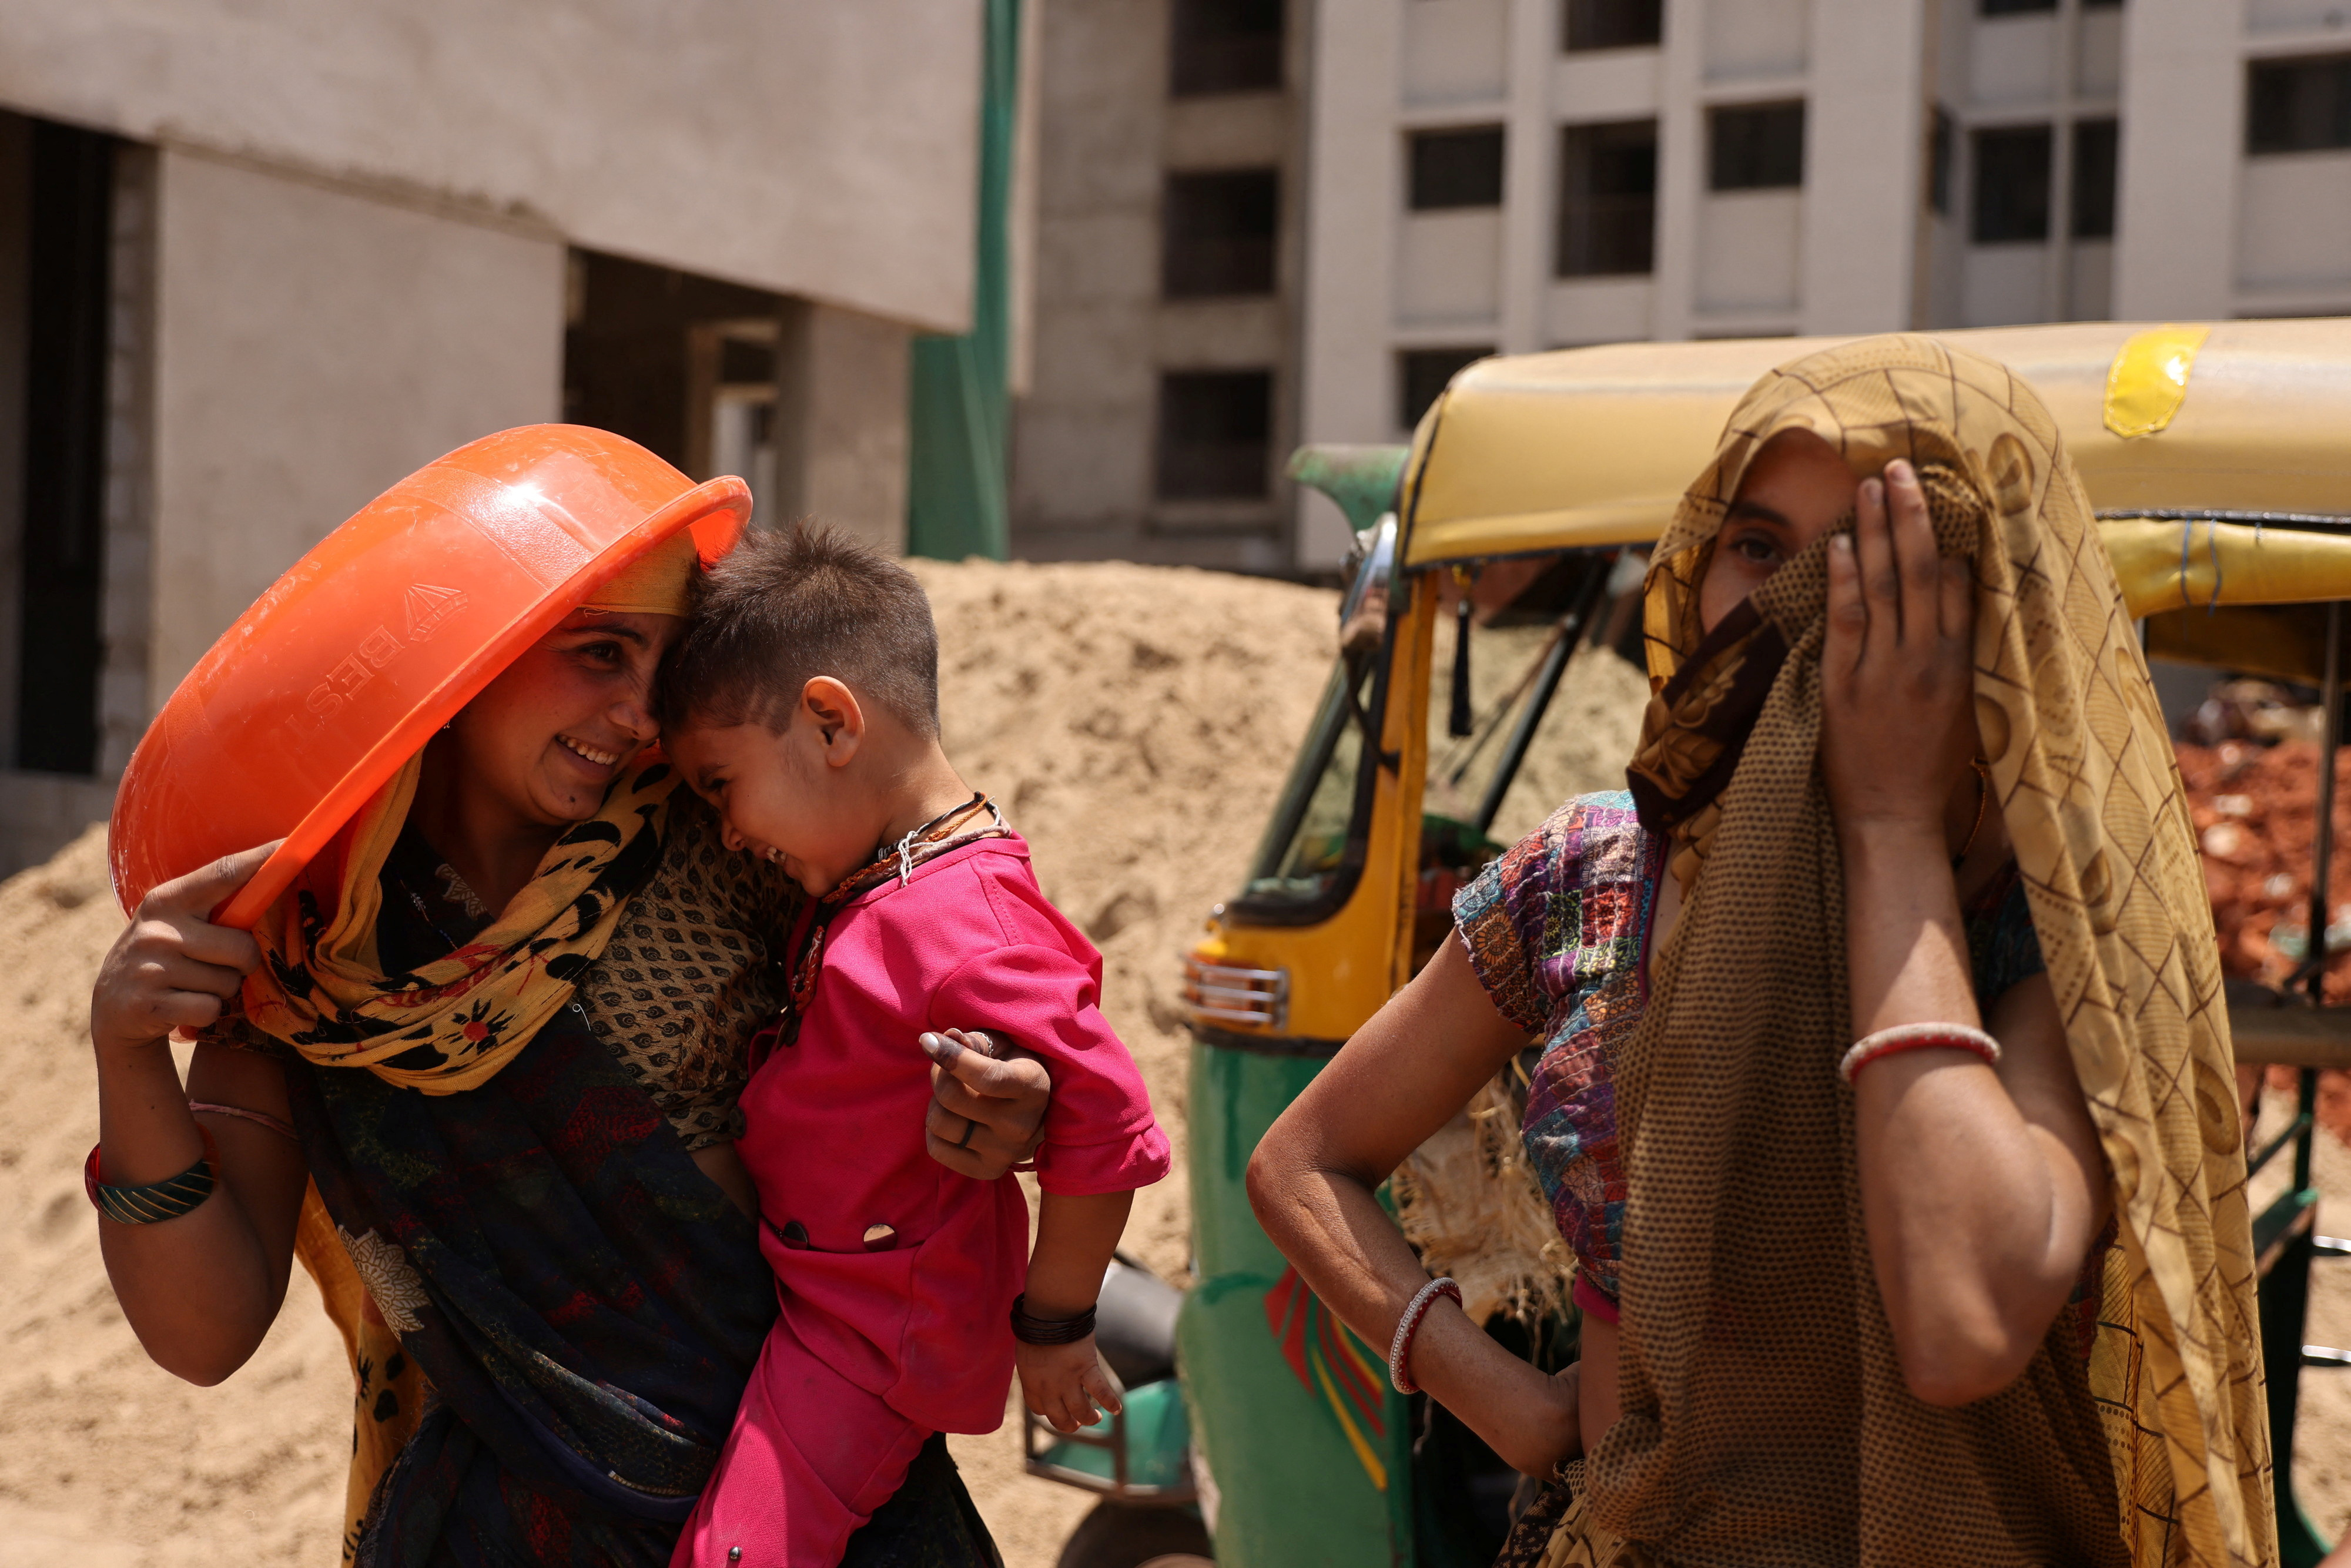 Women take shelter from the sun at a construction site in Ahmedabad